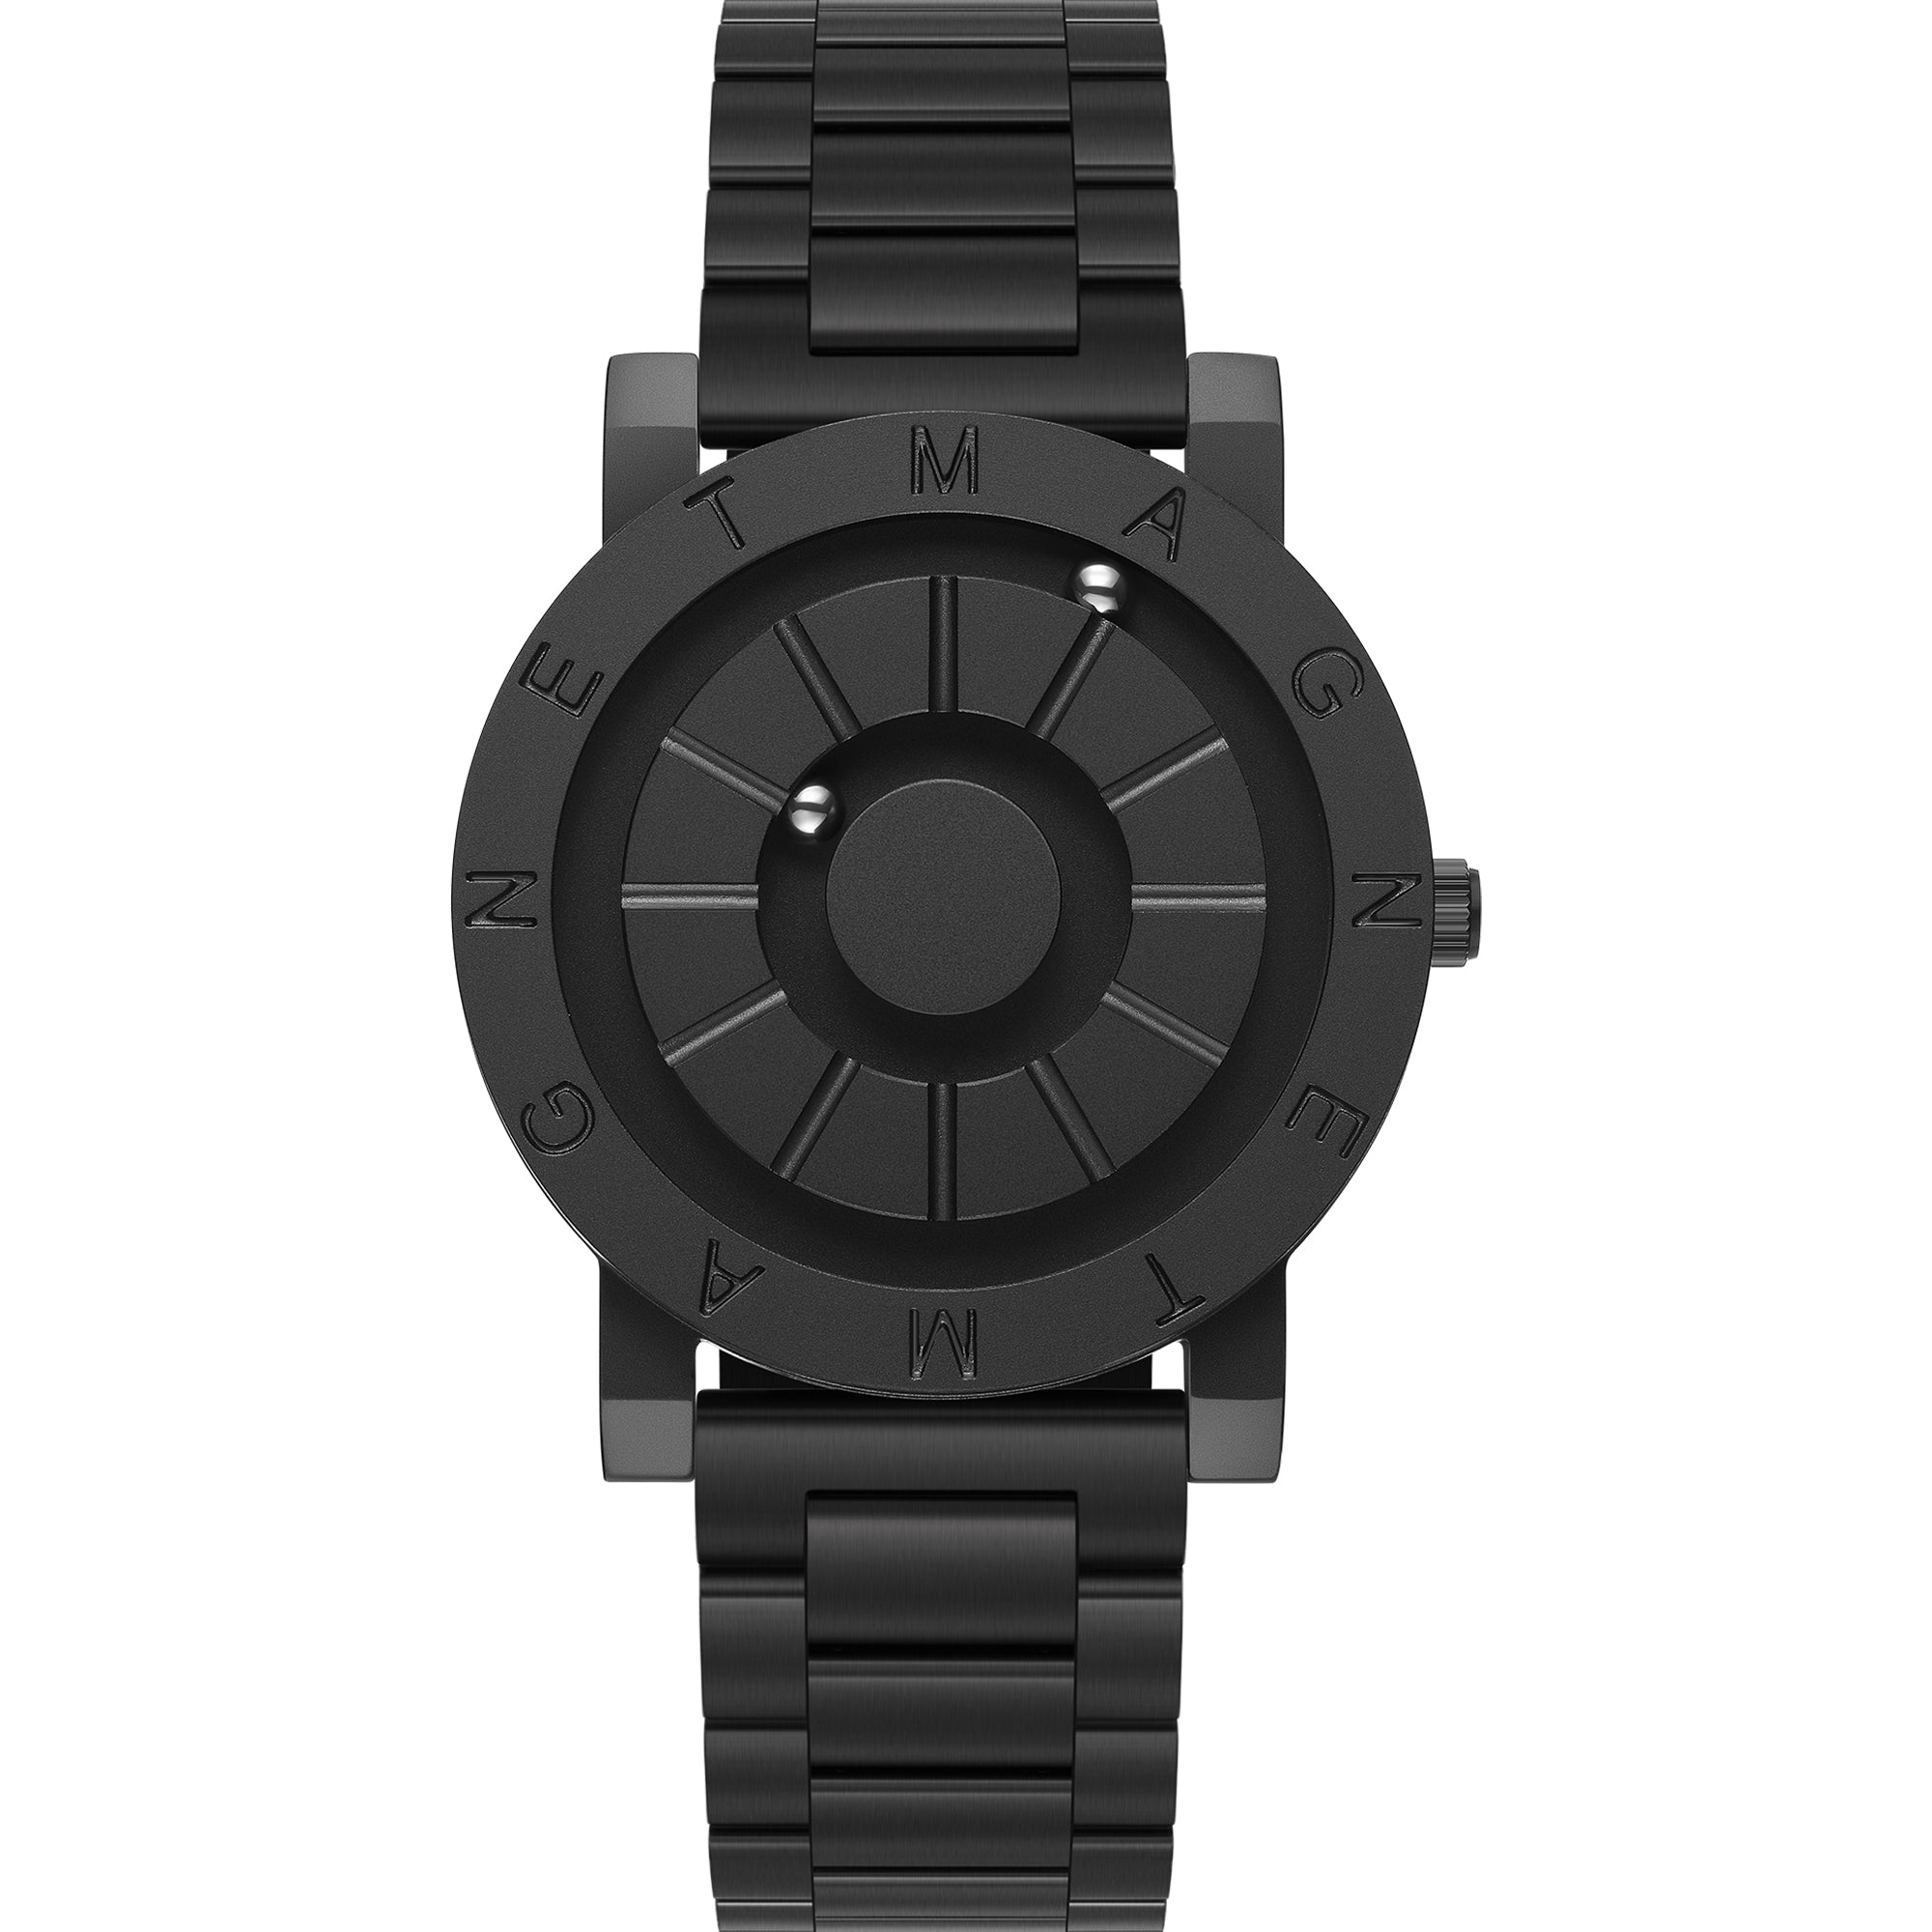 Gemini Series Magnetic Unisex Watch|His u0026 Hers Watches|EUTOUR